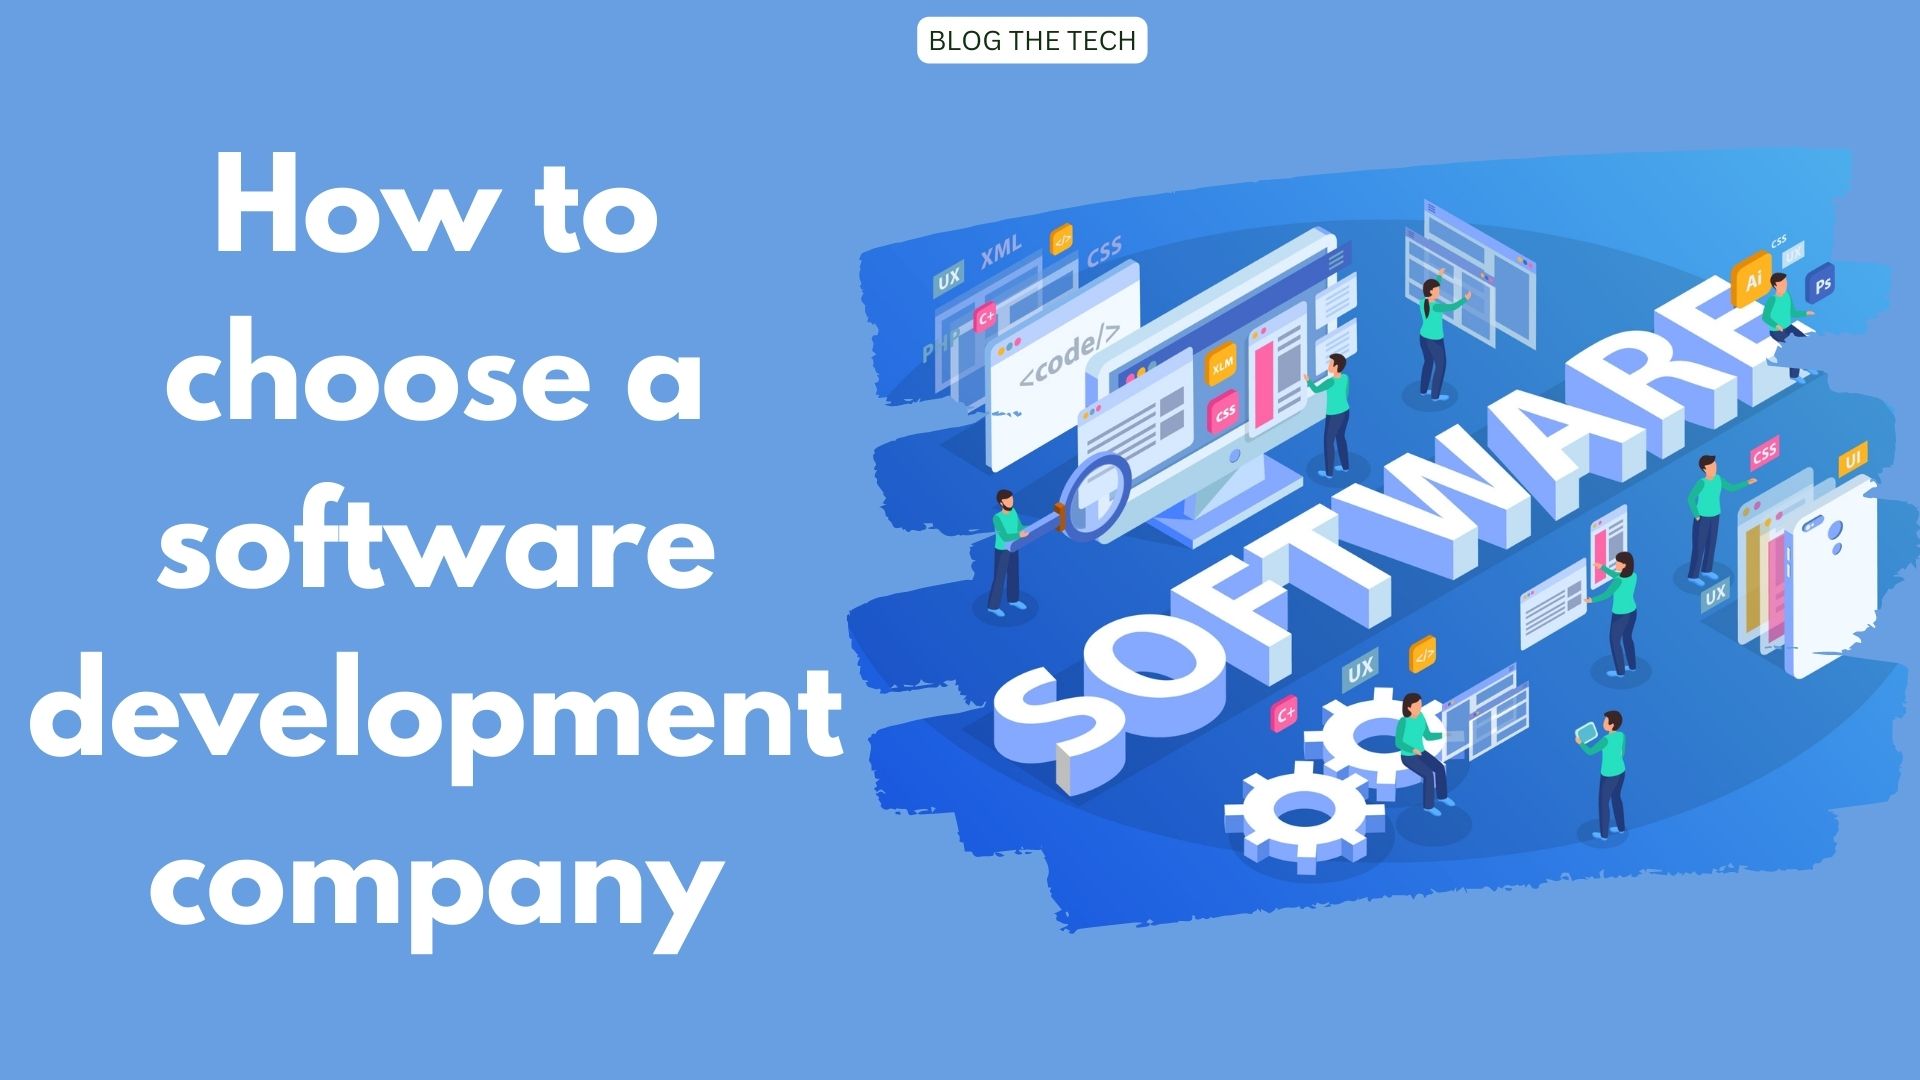 How to choose a software development company